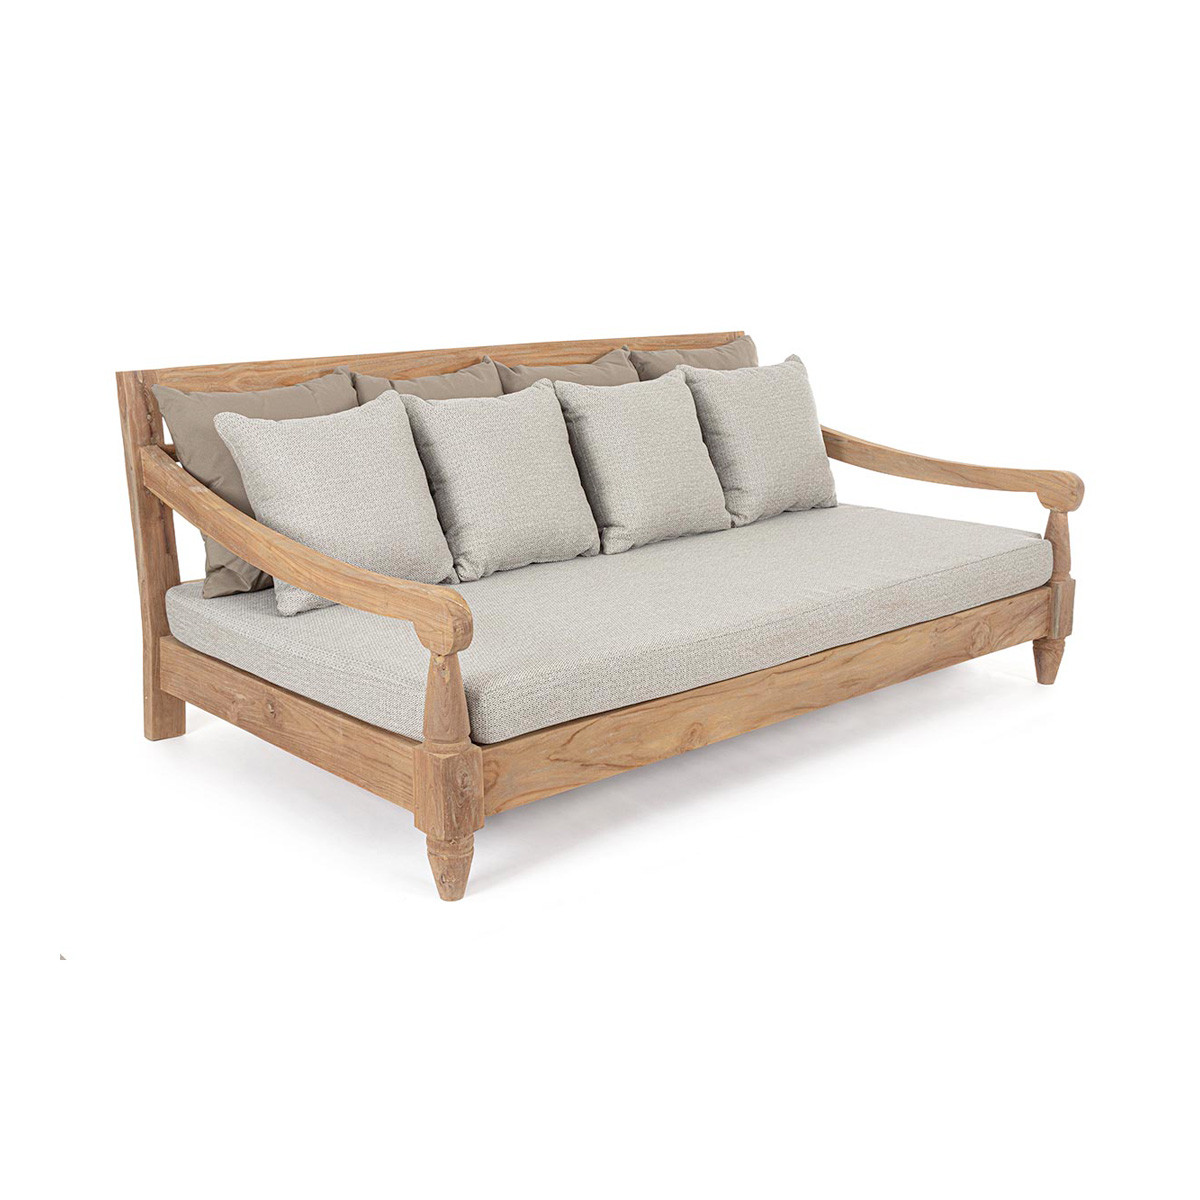 Daybed Bali natural